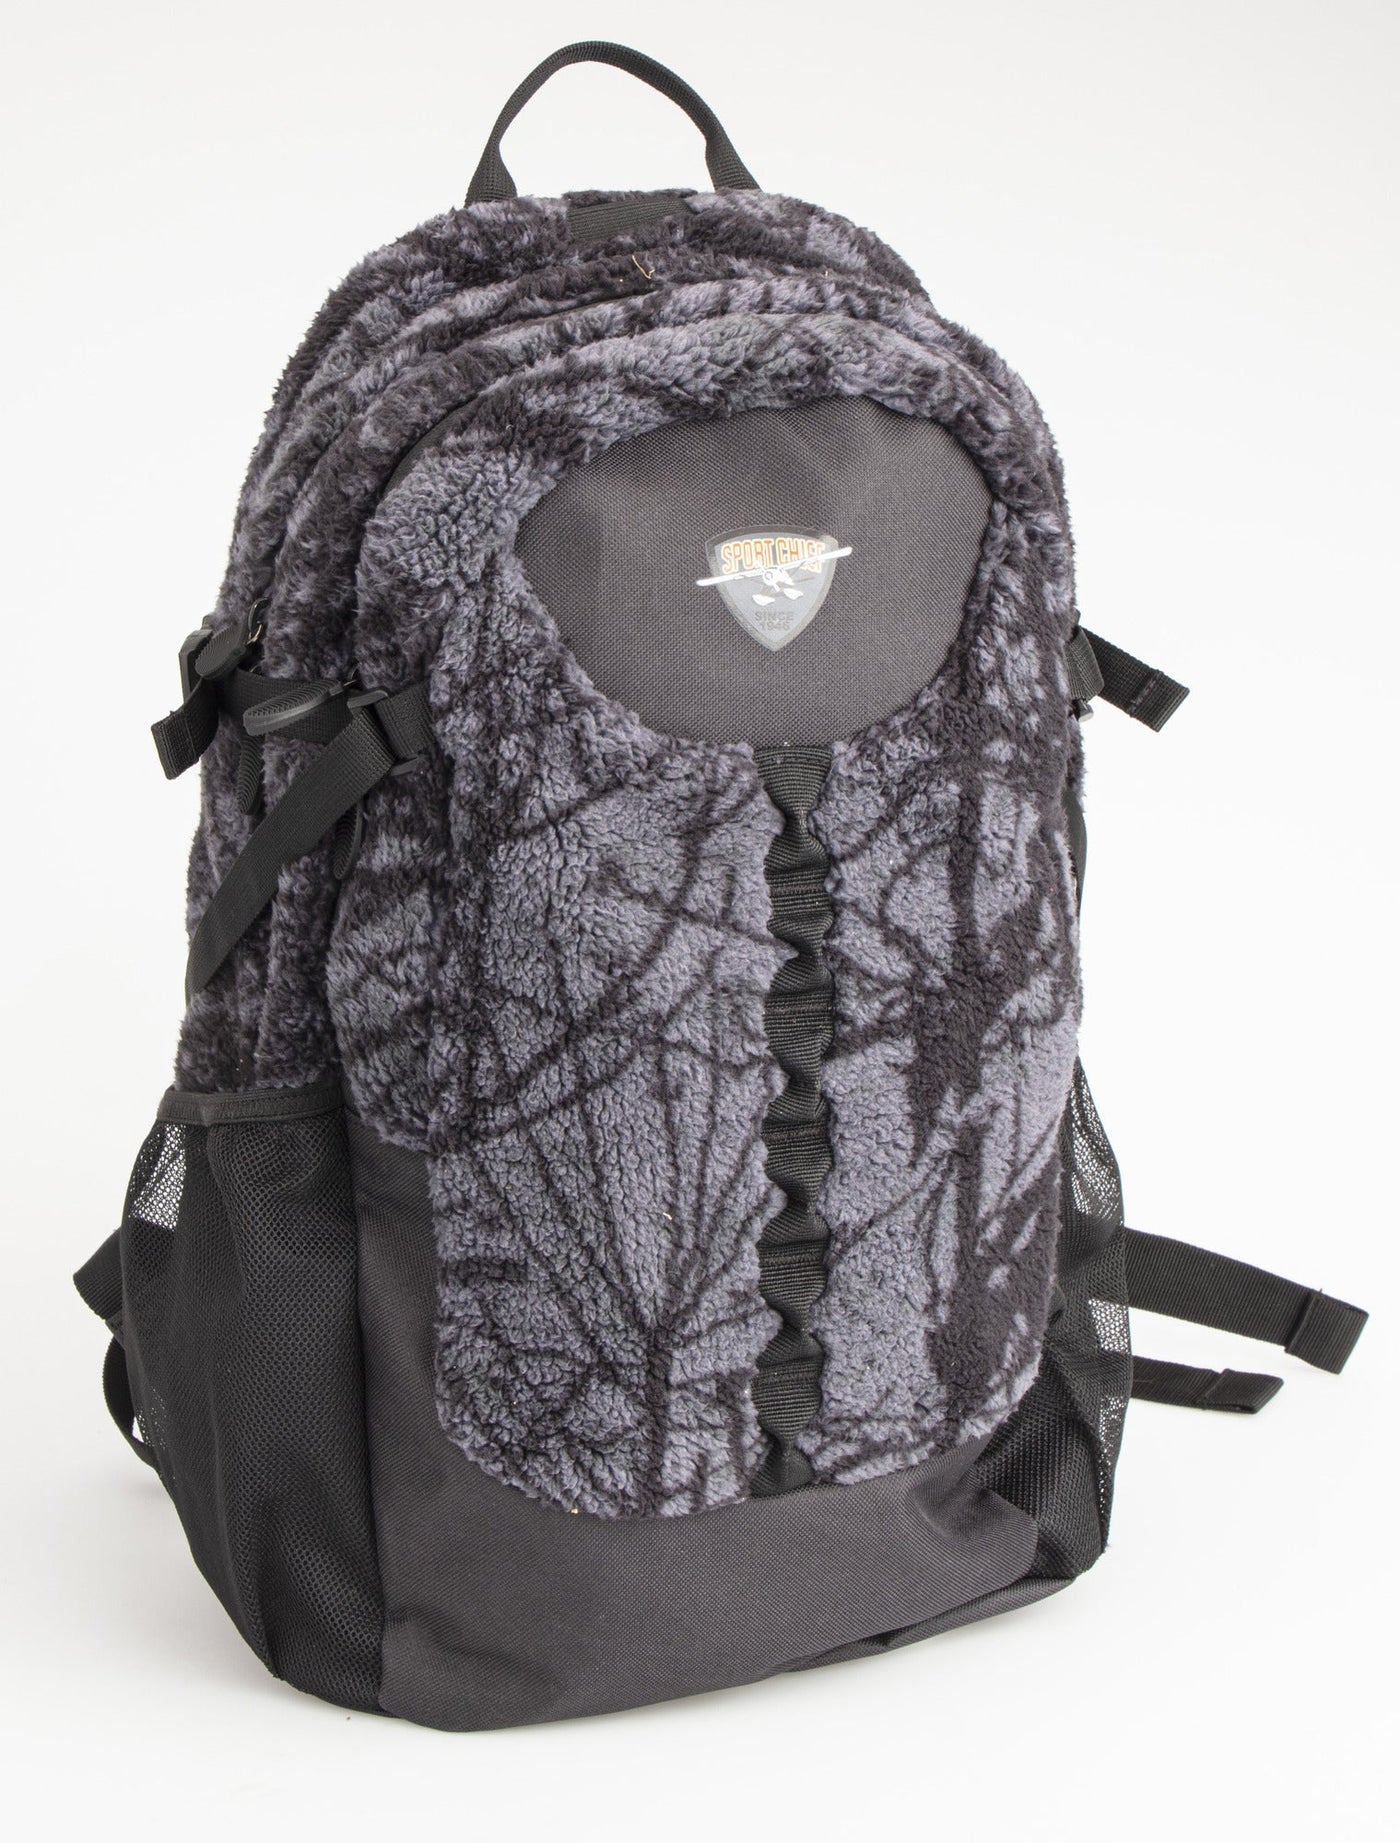 Sac à dos de chasse Ghost ultra silencieux – Ecotone